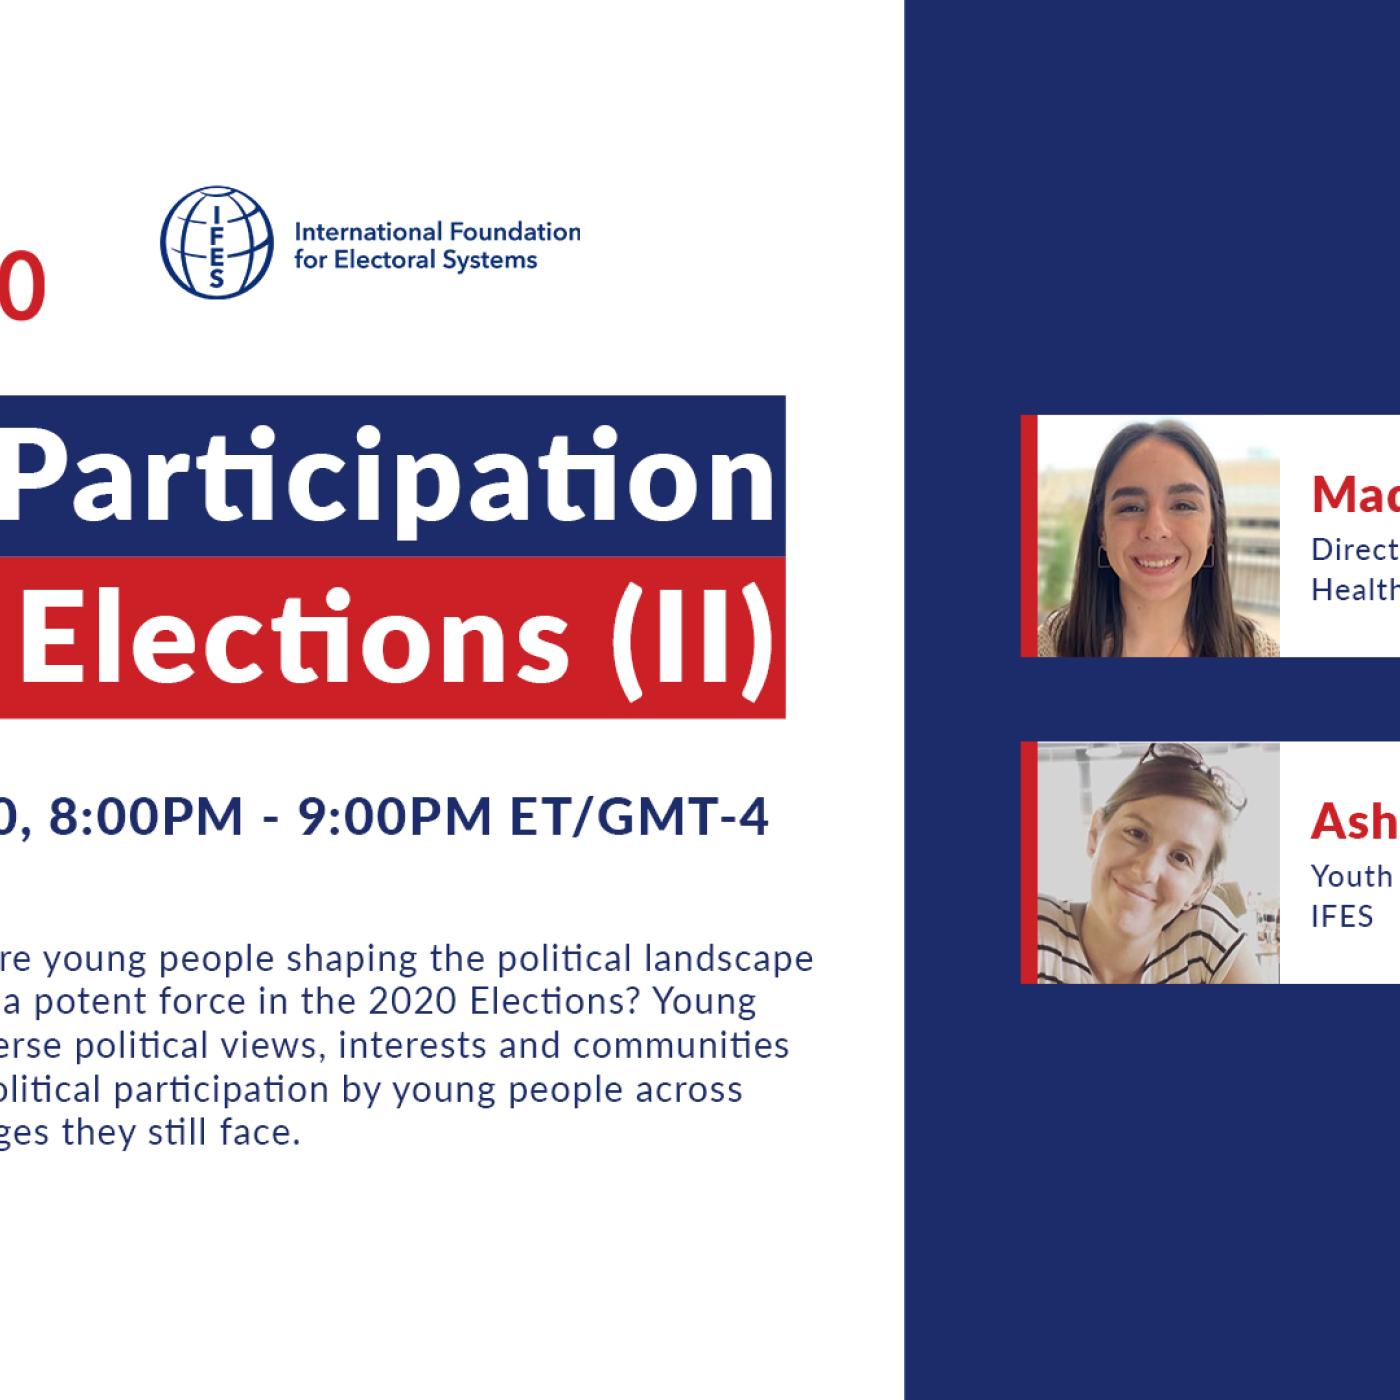 Youth Participation in U.S. Election (II)